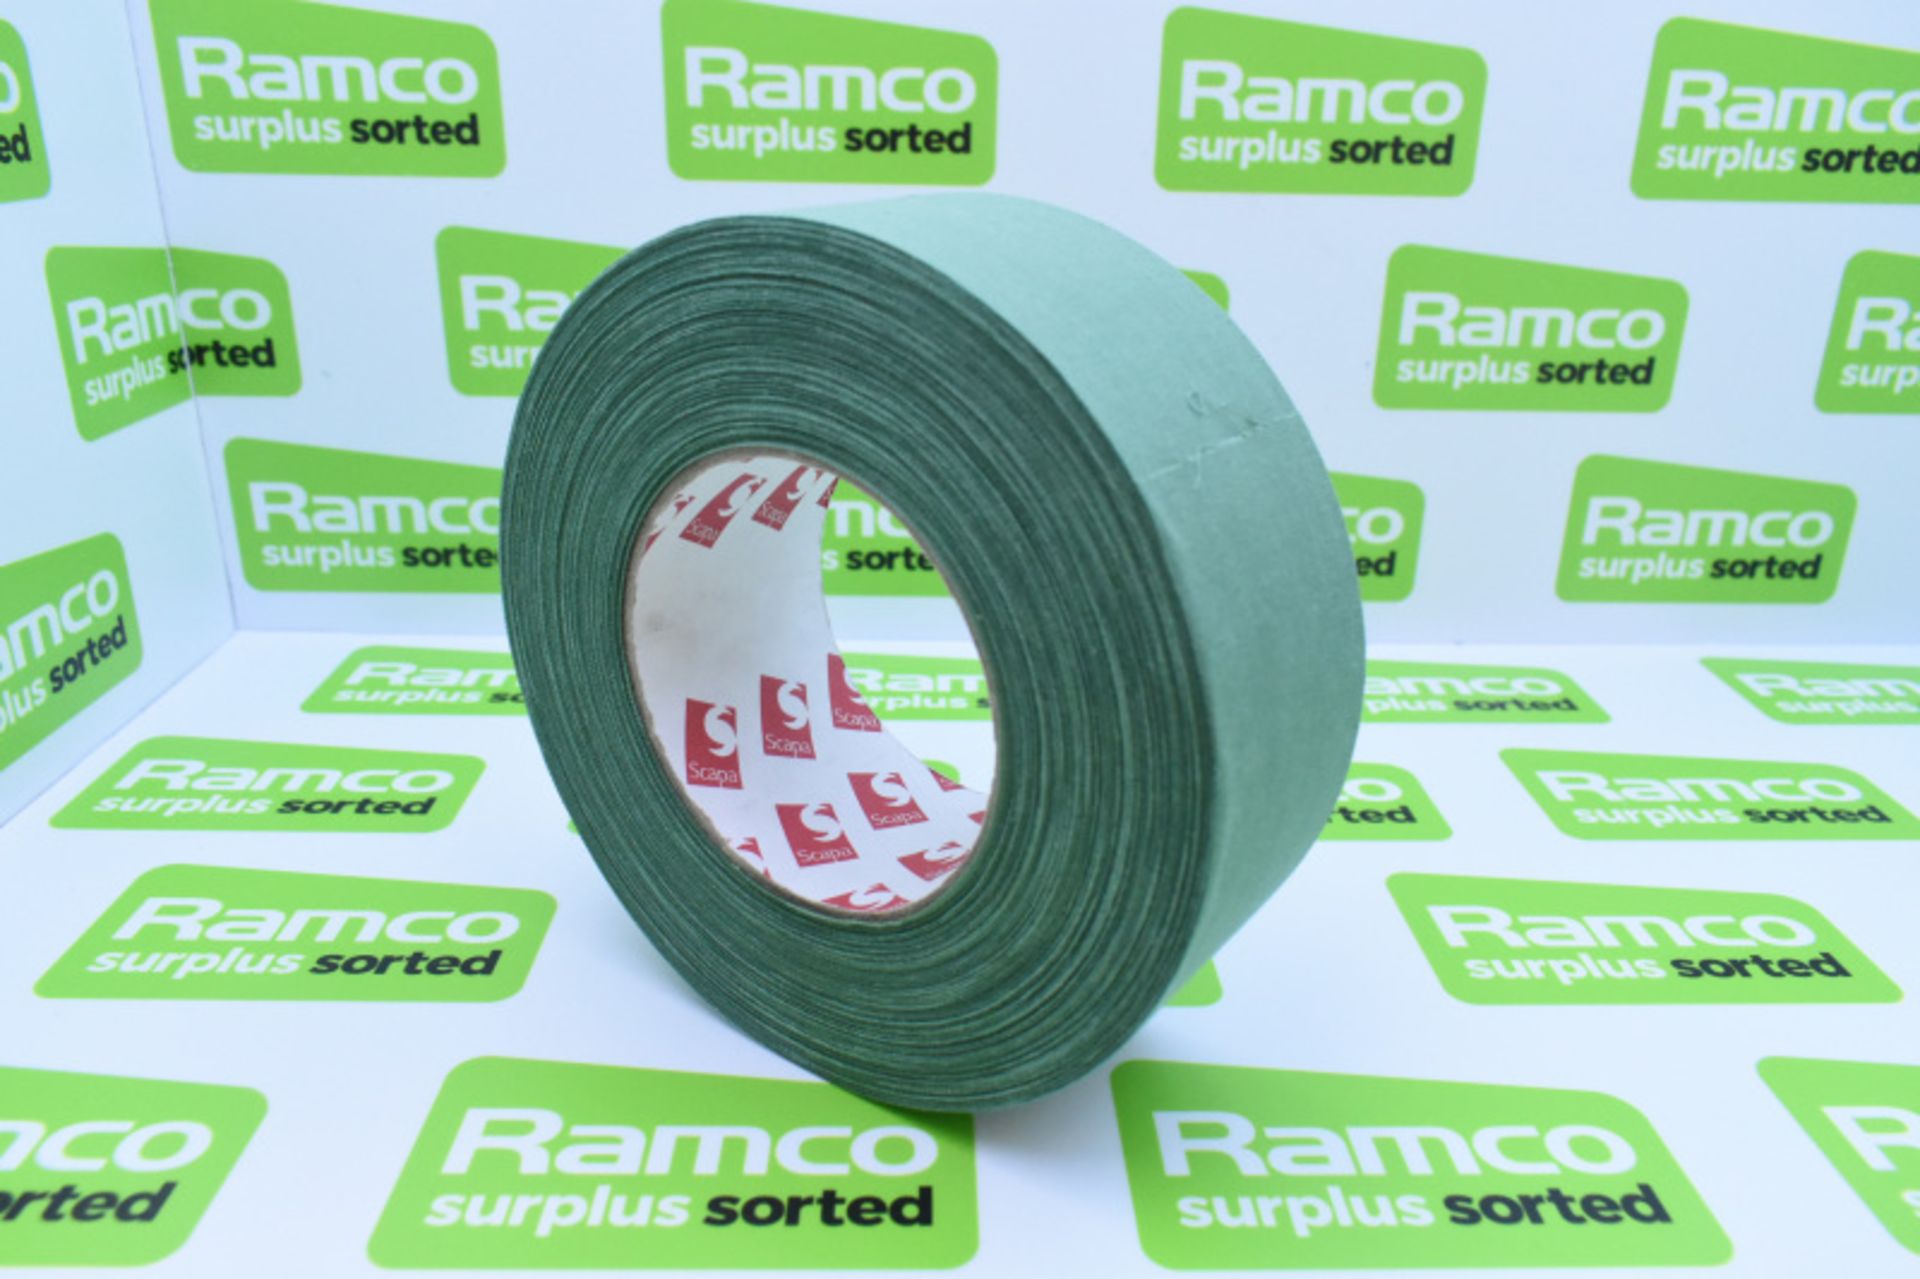 Scapa 3302 Pro Tape - Olive Green - 50mm x 50M rolls - 16 rolls per box - 33 boxes - Image 5 of 5